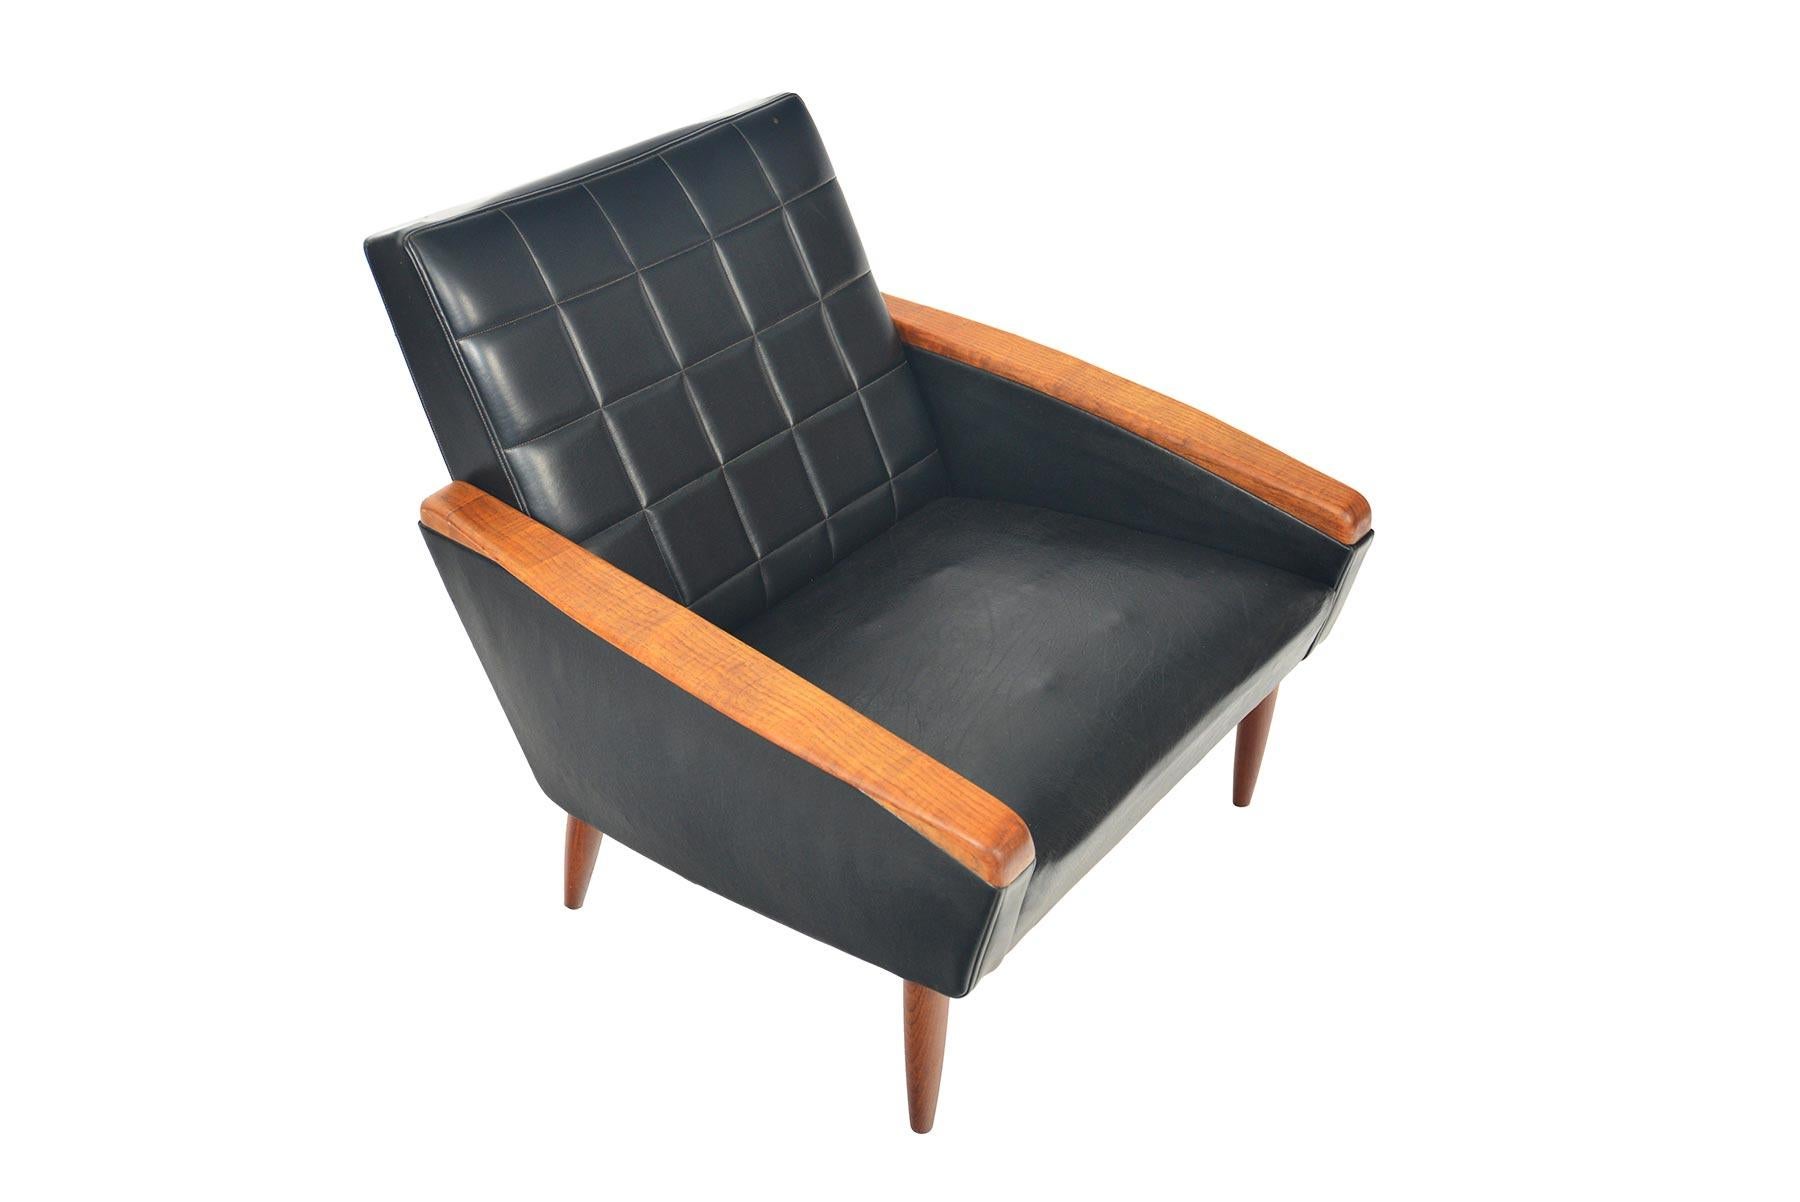 Origin: Denmark
Designer: Unknown
Manufacturer: Unknown
Era: 1960s
Dimensions: 28 wide x 29 deep x 28.5 tall
Seat: 22 side x 19 deep x 14 tall

Condition: Vinyl in fair original condition with minor losses.

*Price Includes